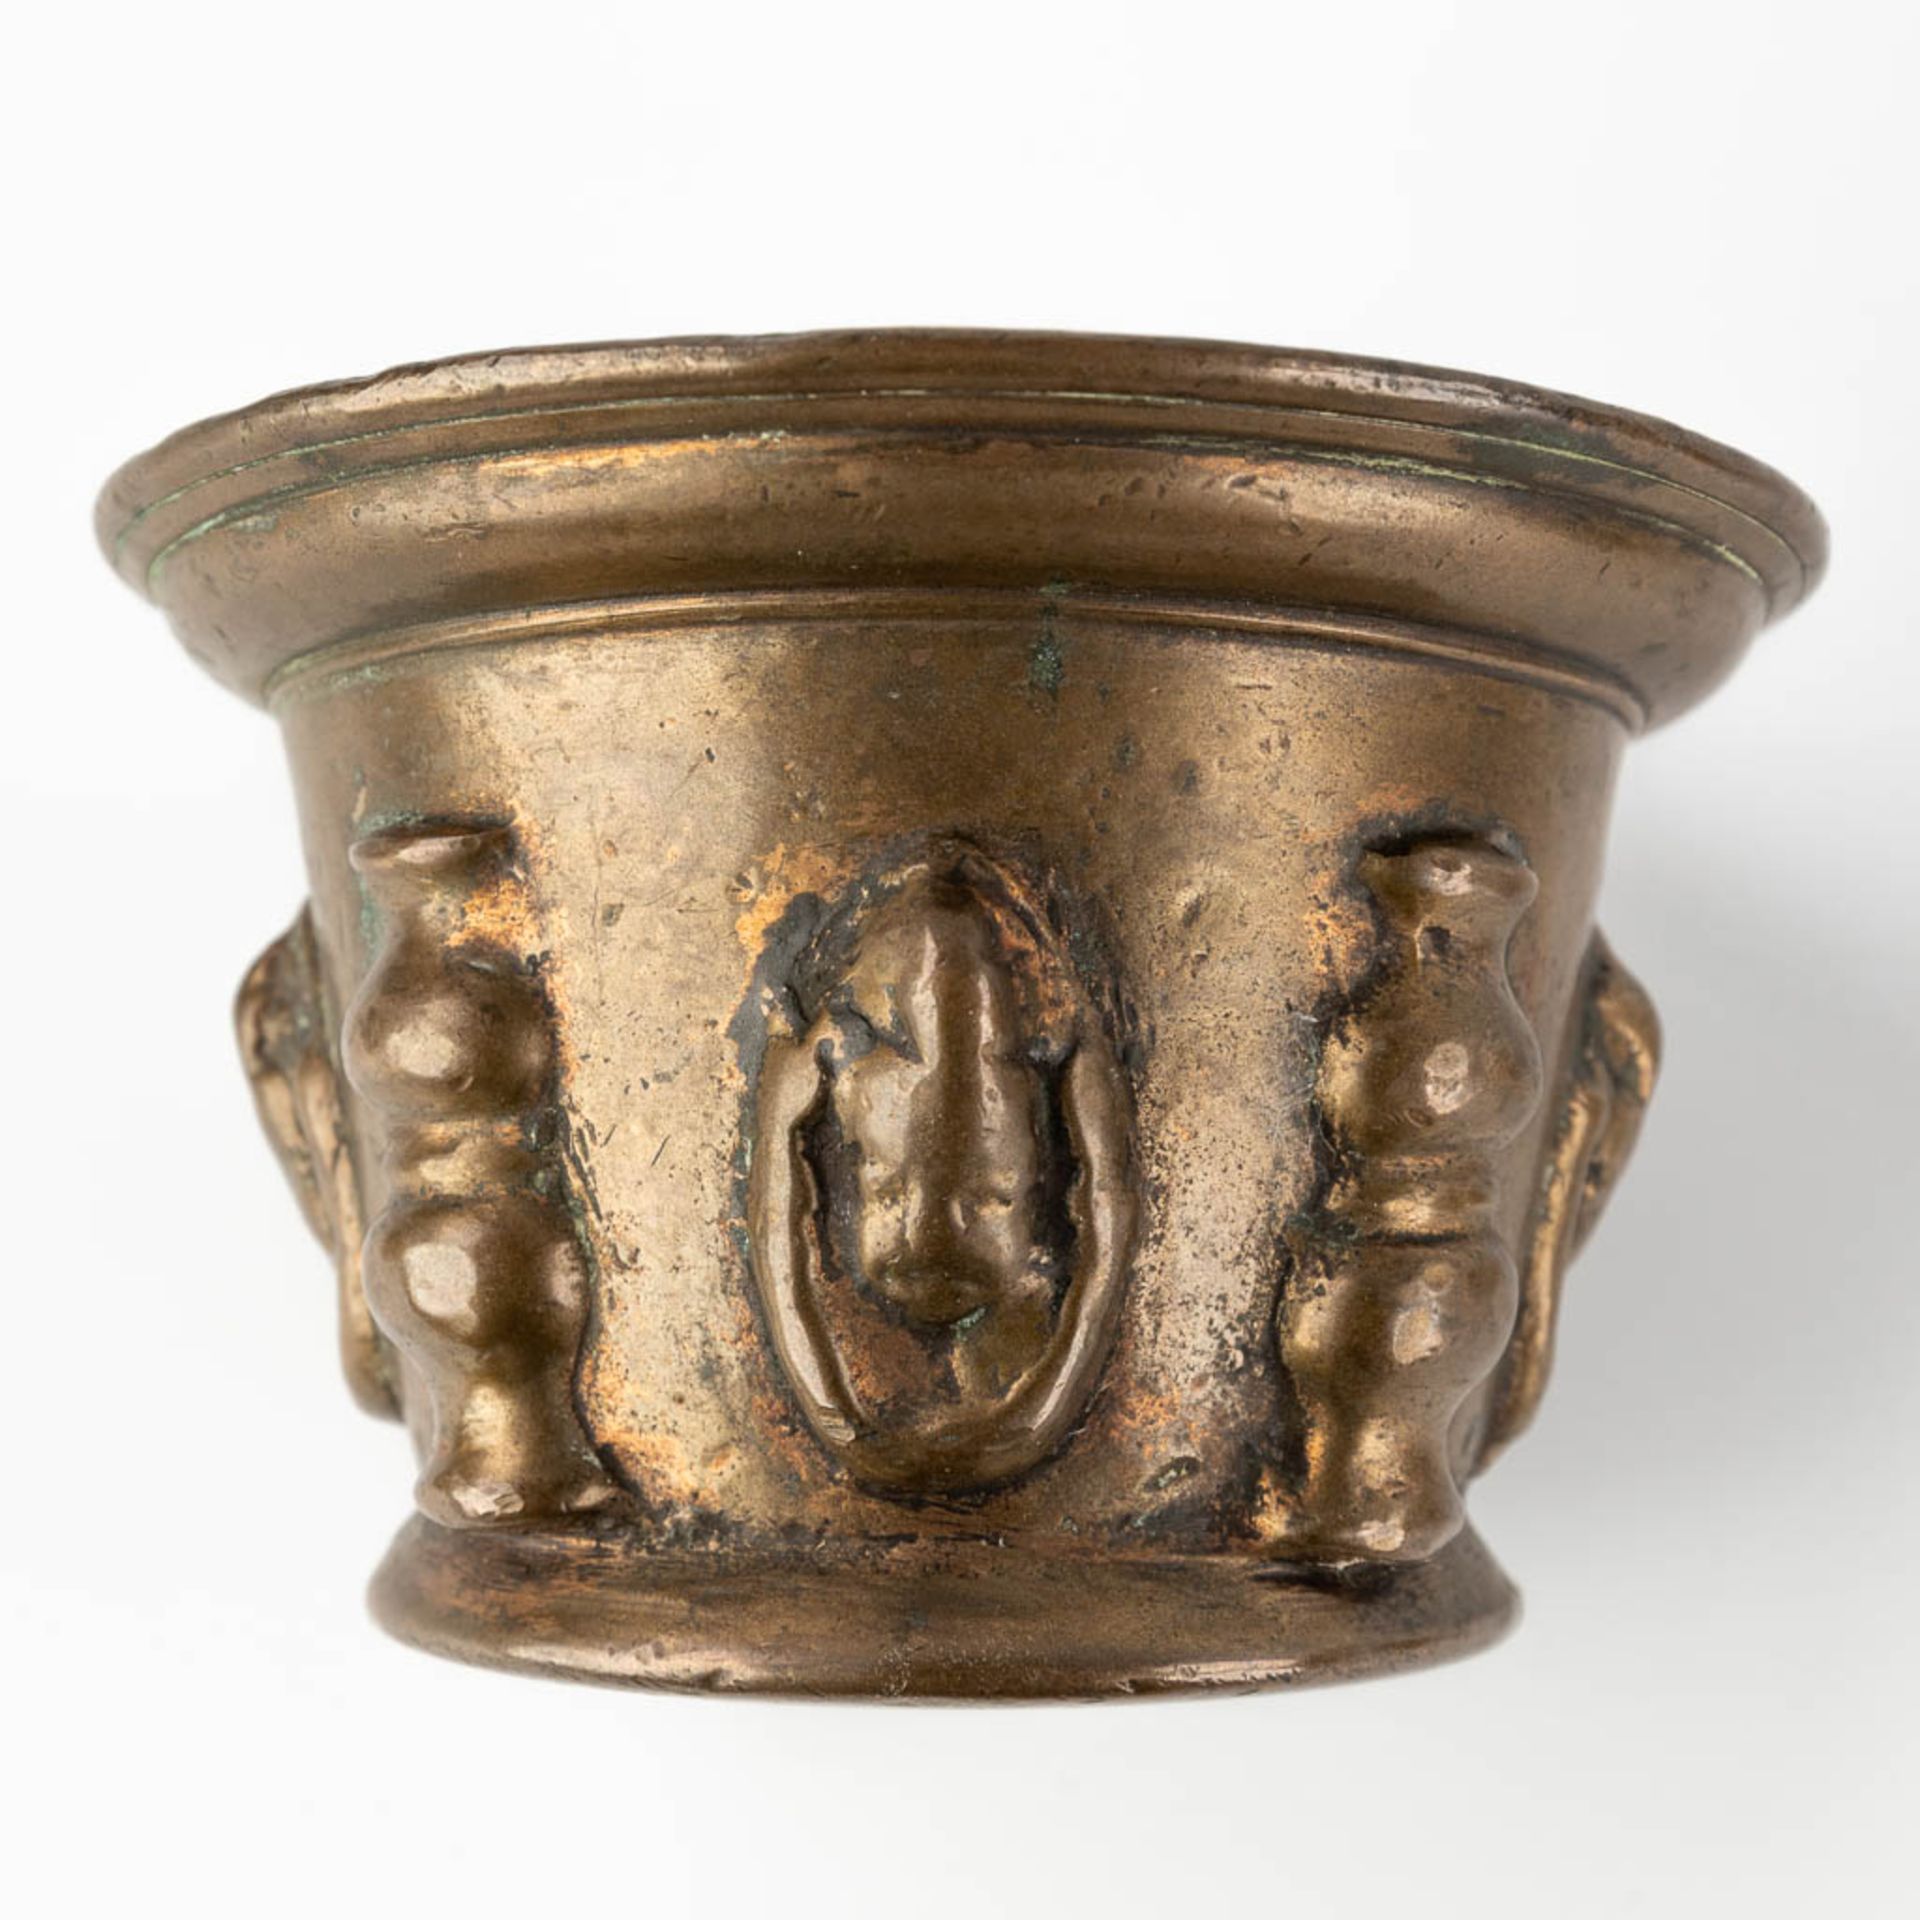 Three antique mortars with two pestles, bronze. Probably Spain, 17th/18th C. (H:9 x D:13 cm) - Image 11 of 12